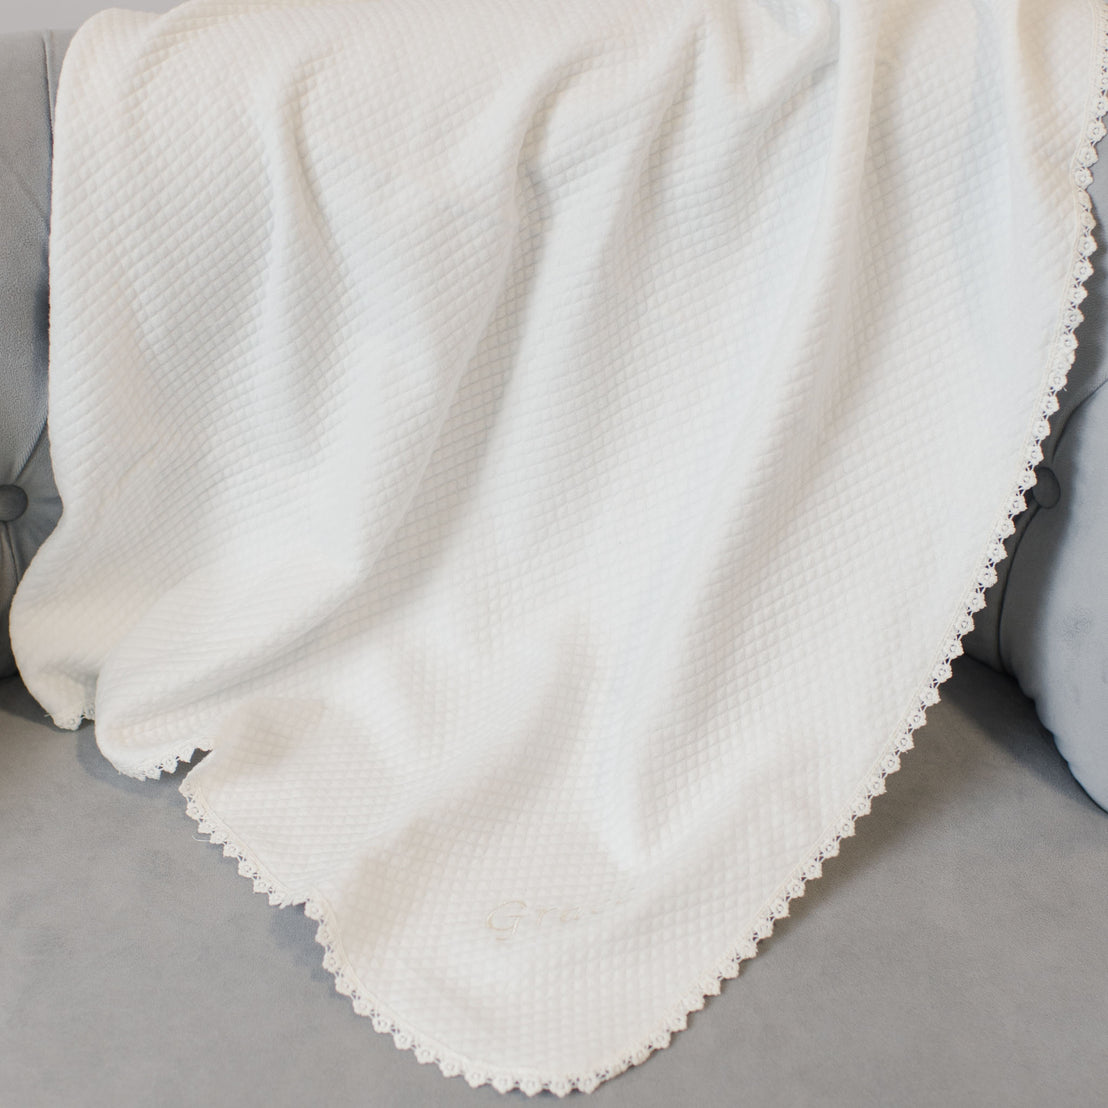 A Grace Blanket, perfect as a baby shower gift, with a delicate textured pattern and scalloped edges drapes elegantly over a gray sofa.